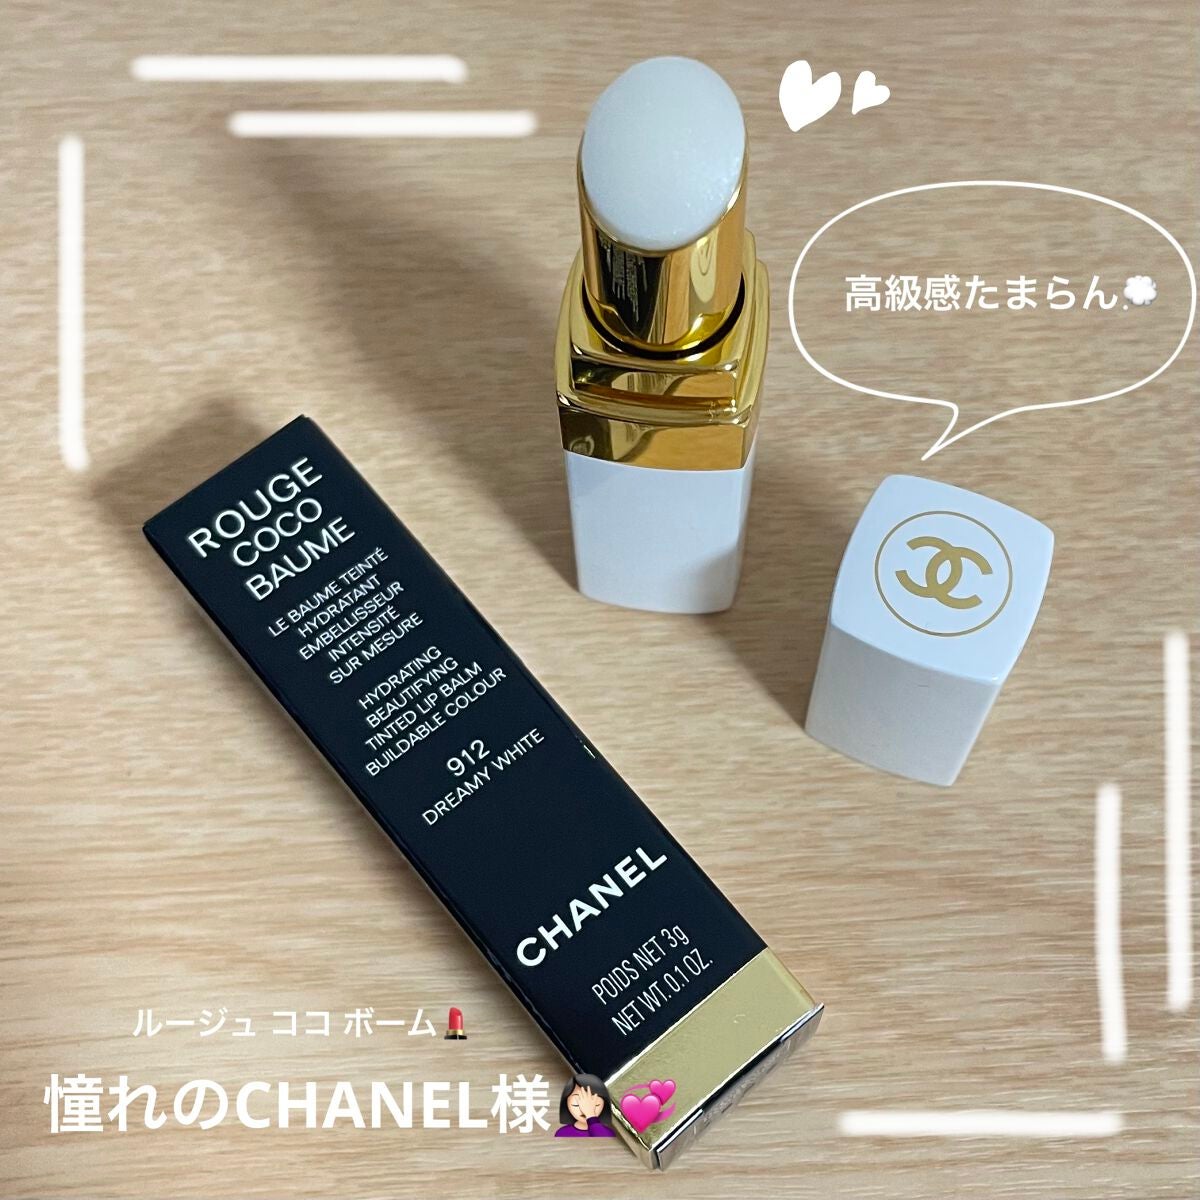 Chanel Rouge Coco Baume Hydrating Beautifying Tinted Lip Balm0.1 oz 3 g  COSME-DE.COM